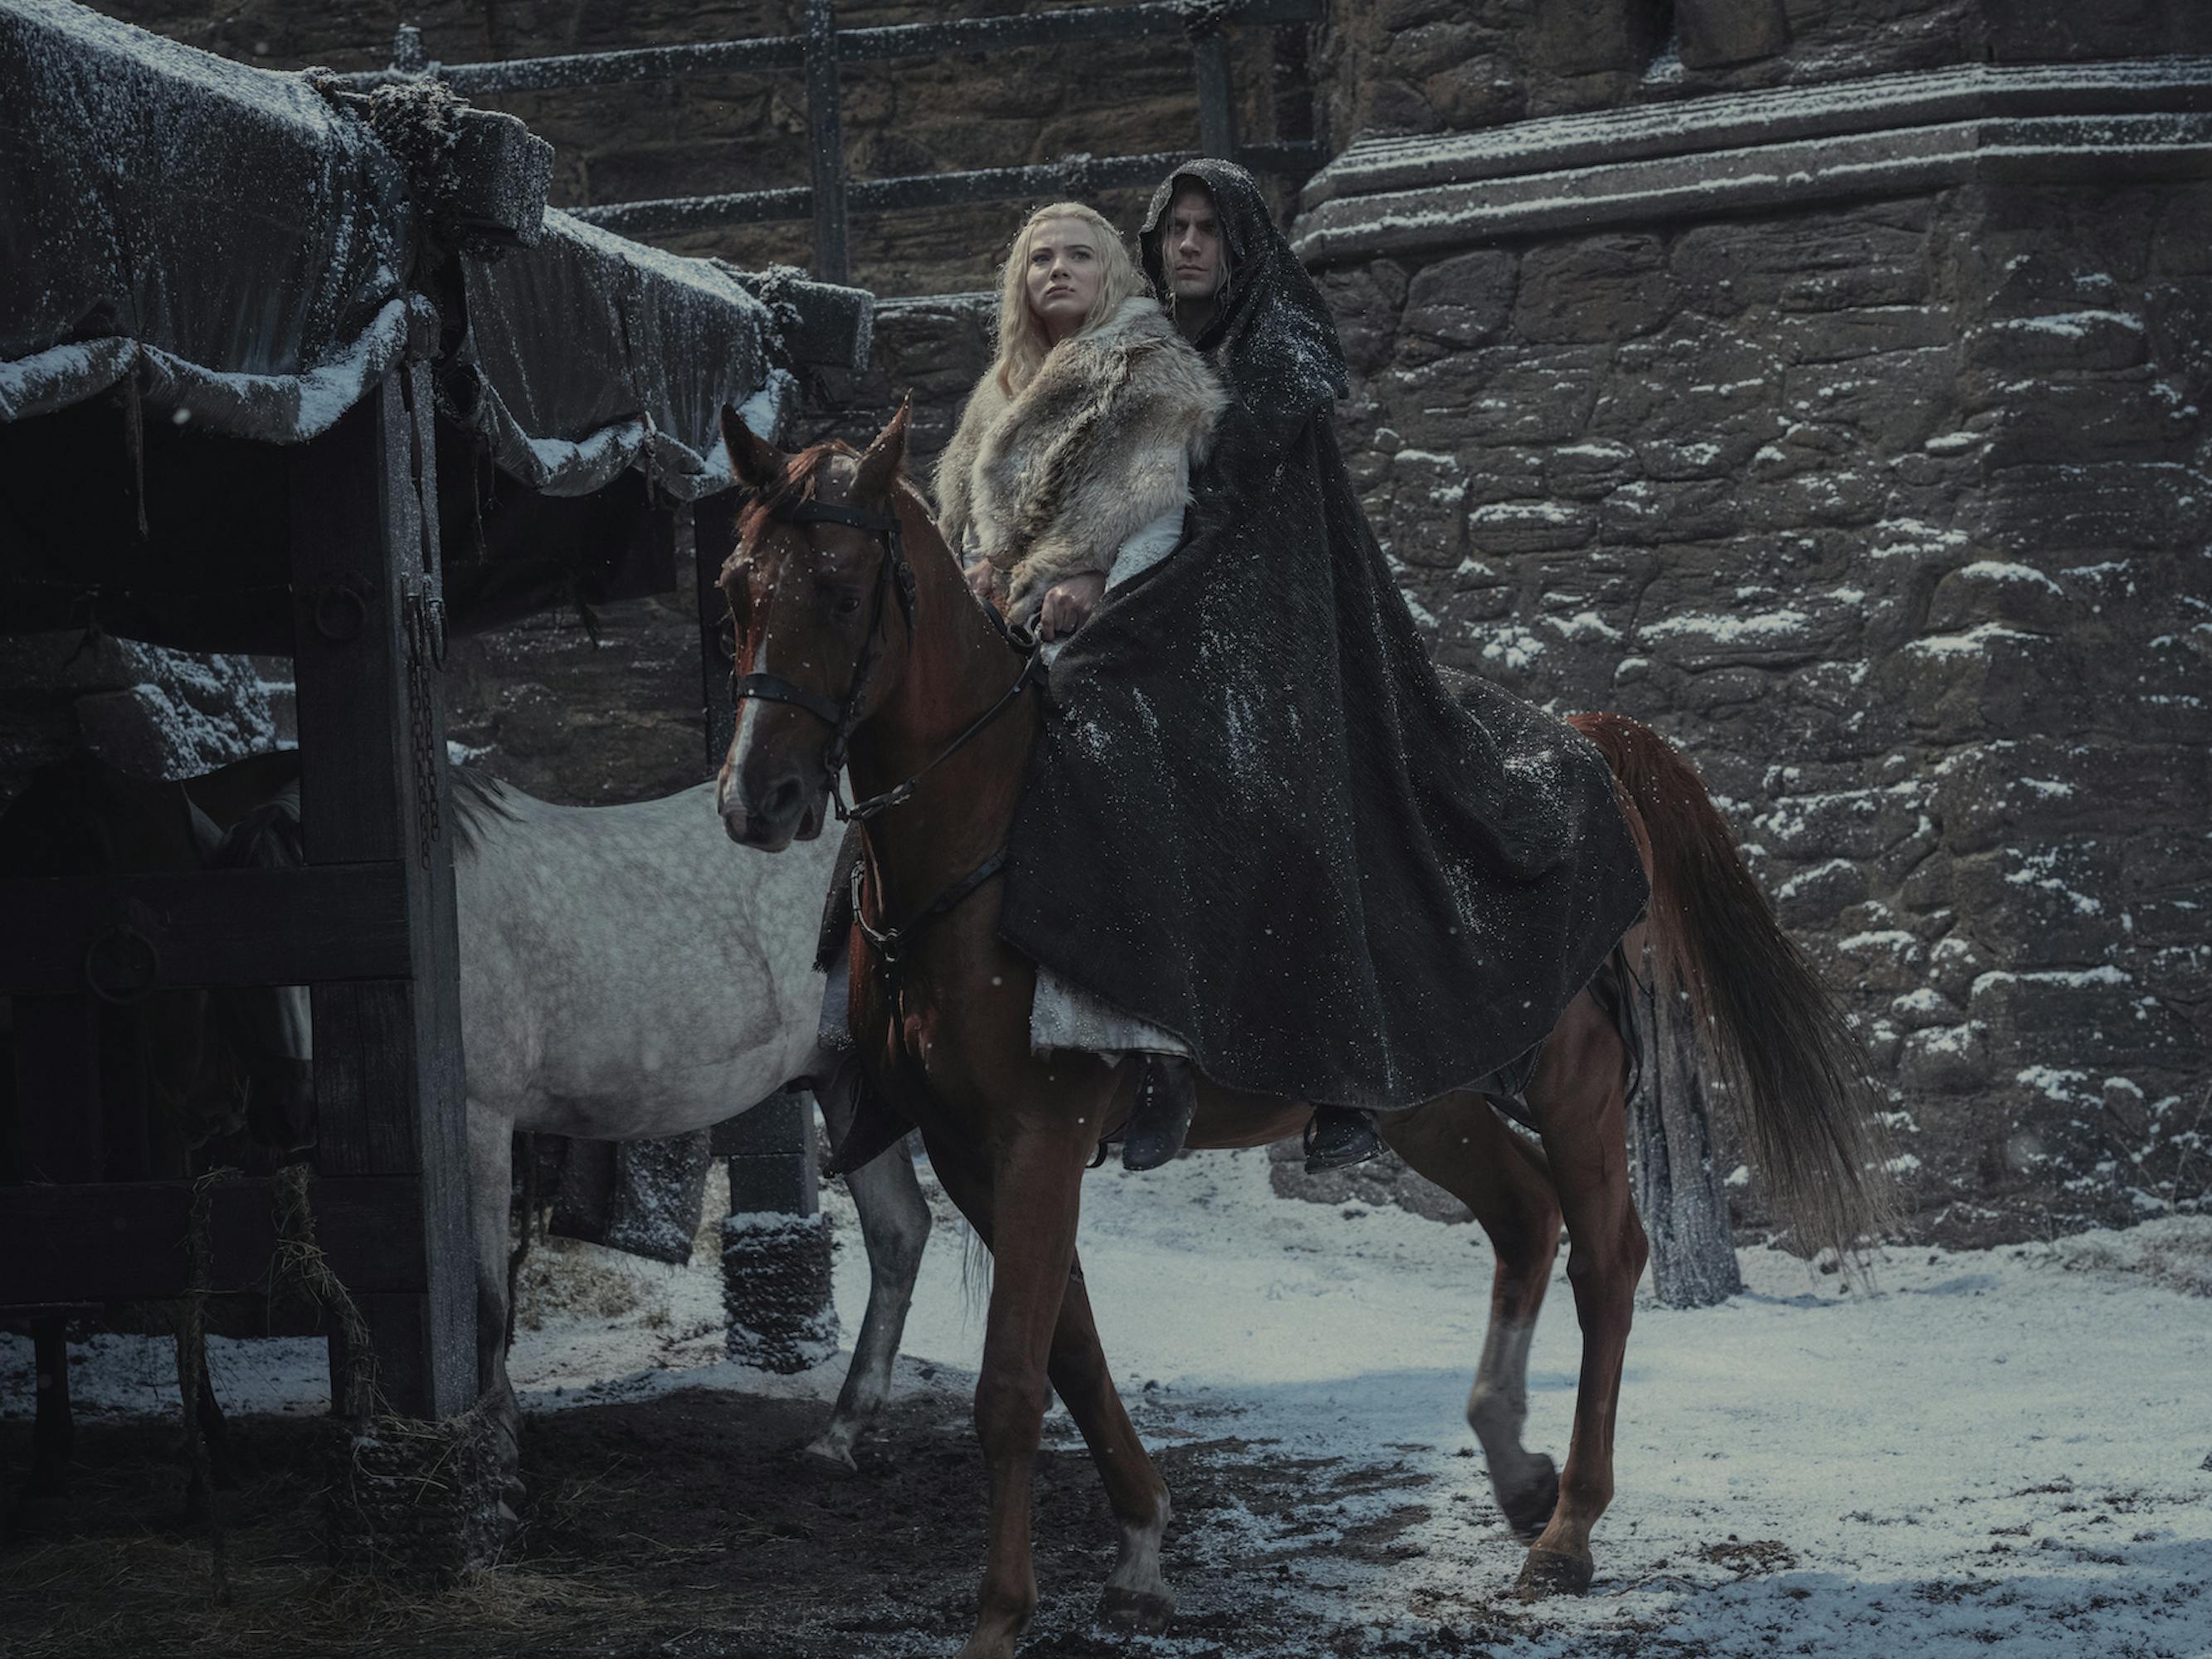 Freya Allen and Henry Cavill ride a brown horse in this snowy scene. Freya wears a light fur, and Cavill wears a dramatic black cloak. 